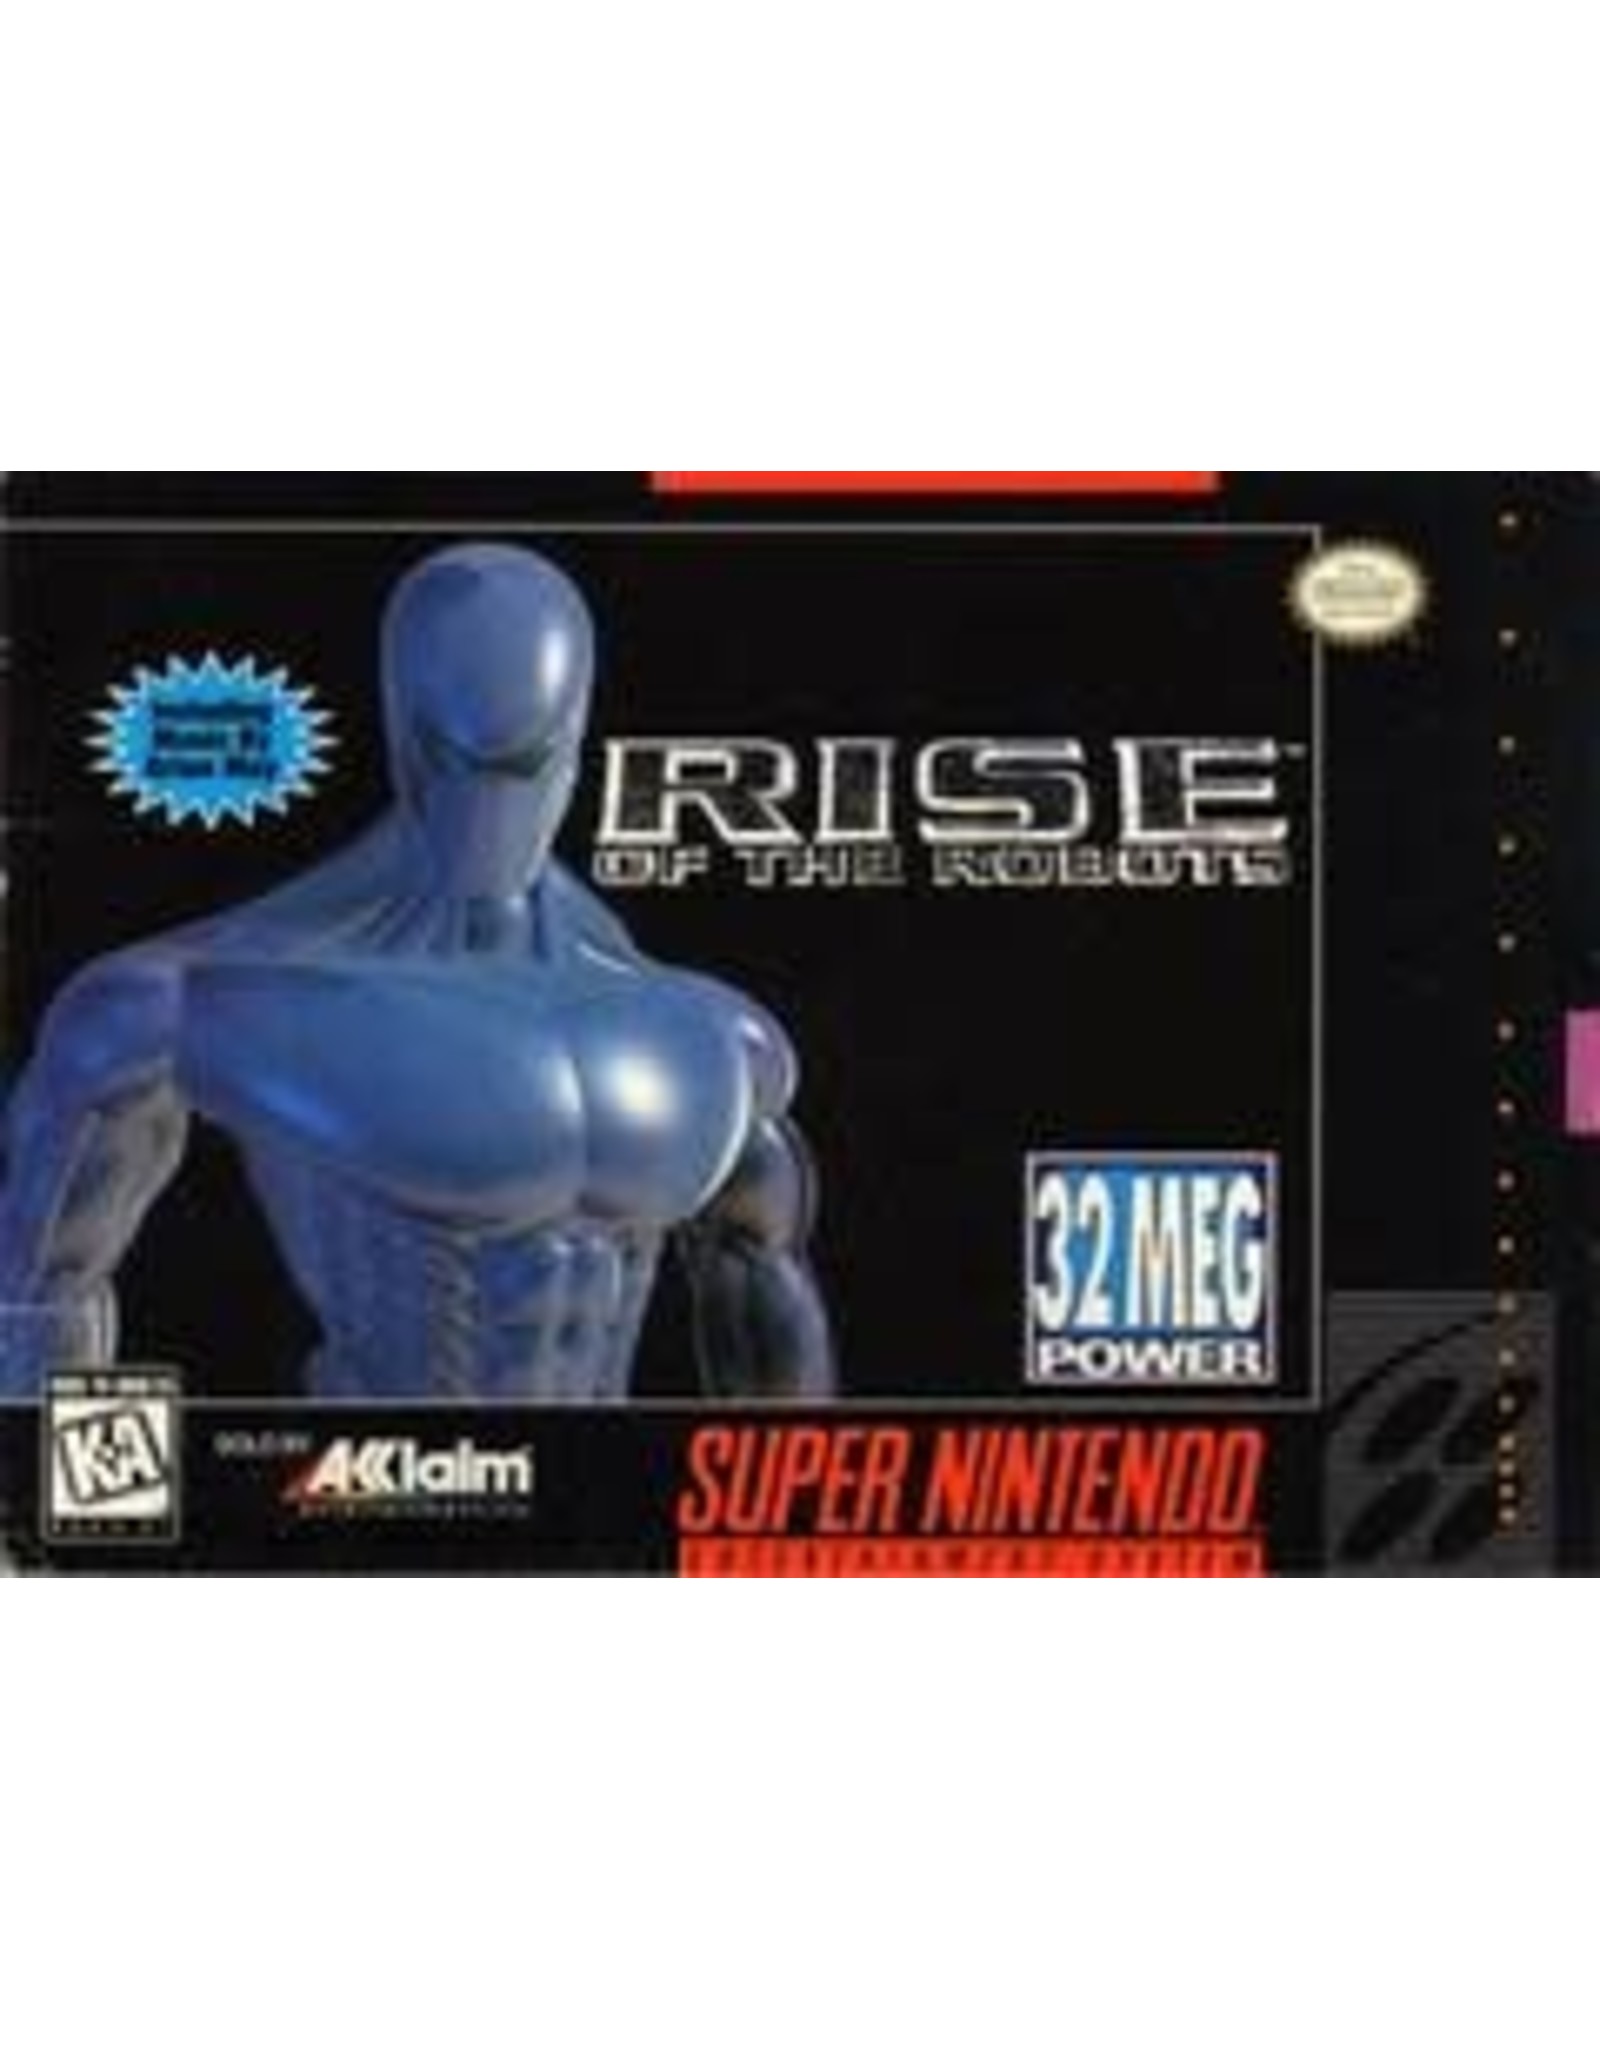 Super Nintendo Rise of the Robots (Cart Only)